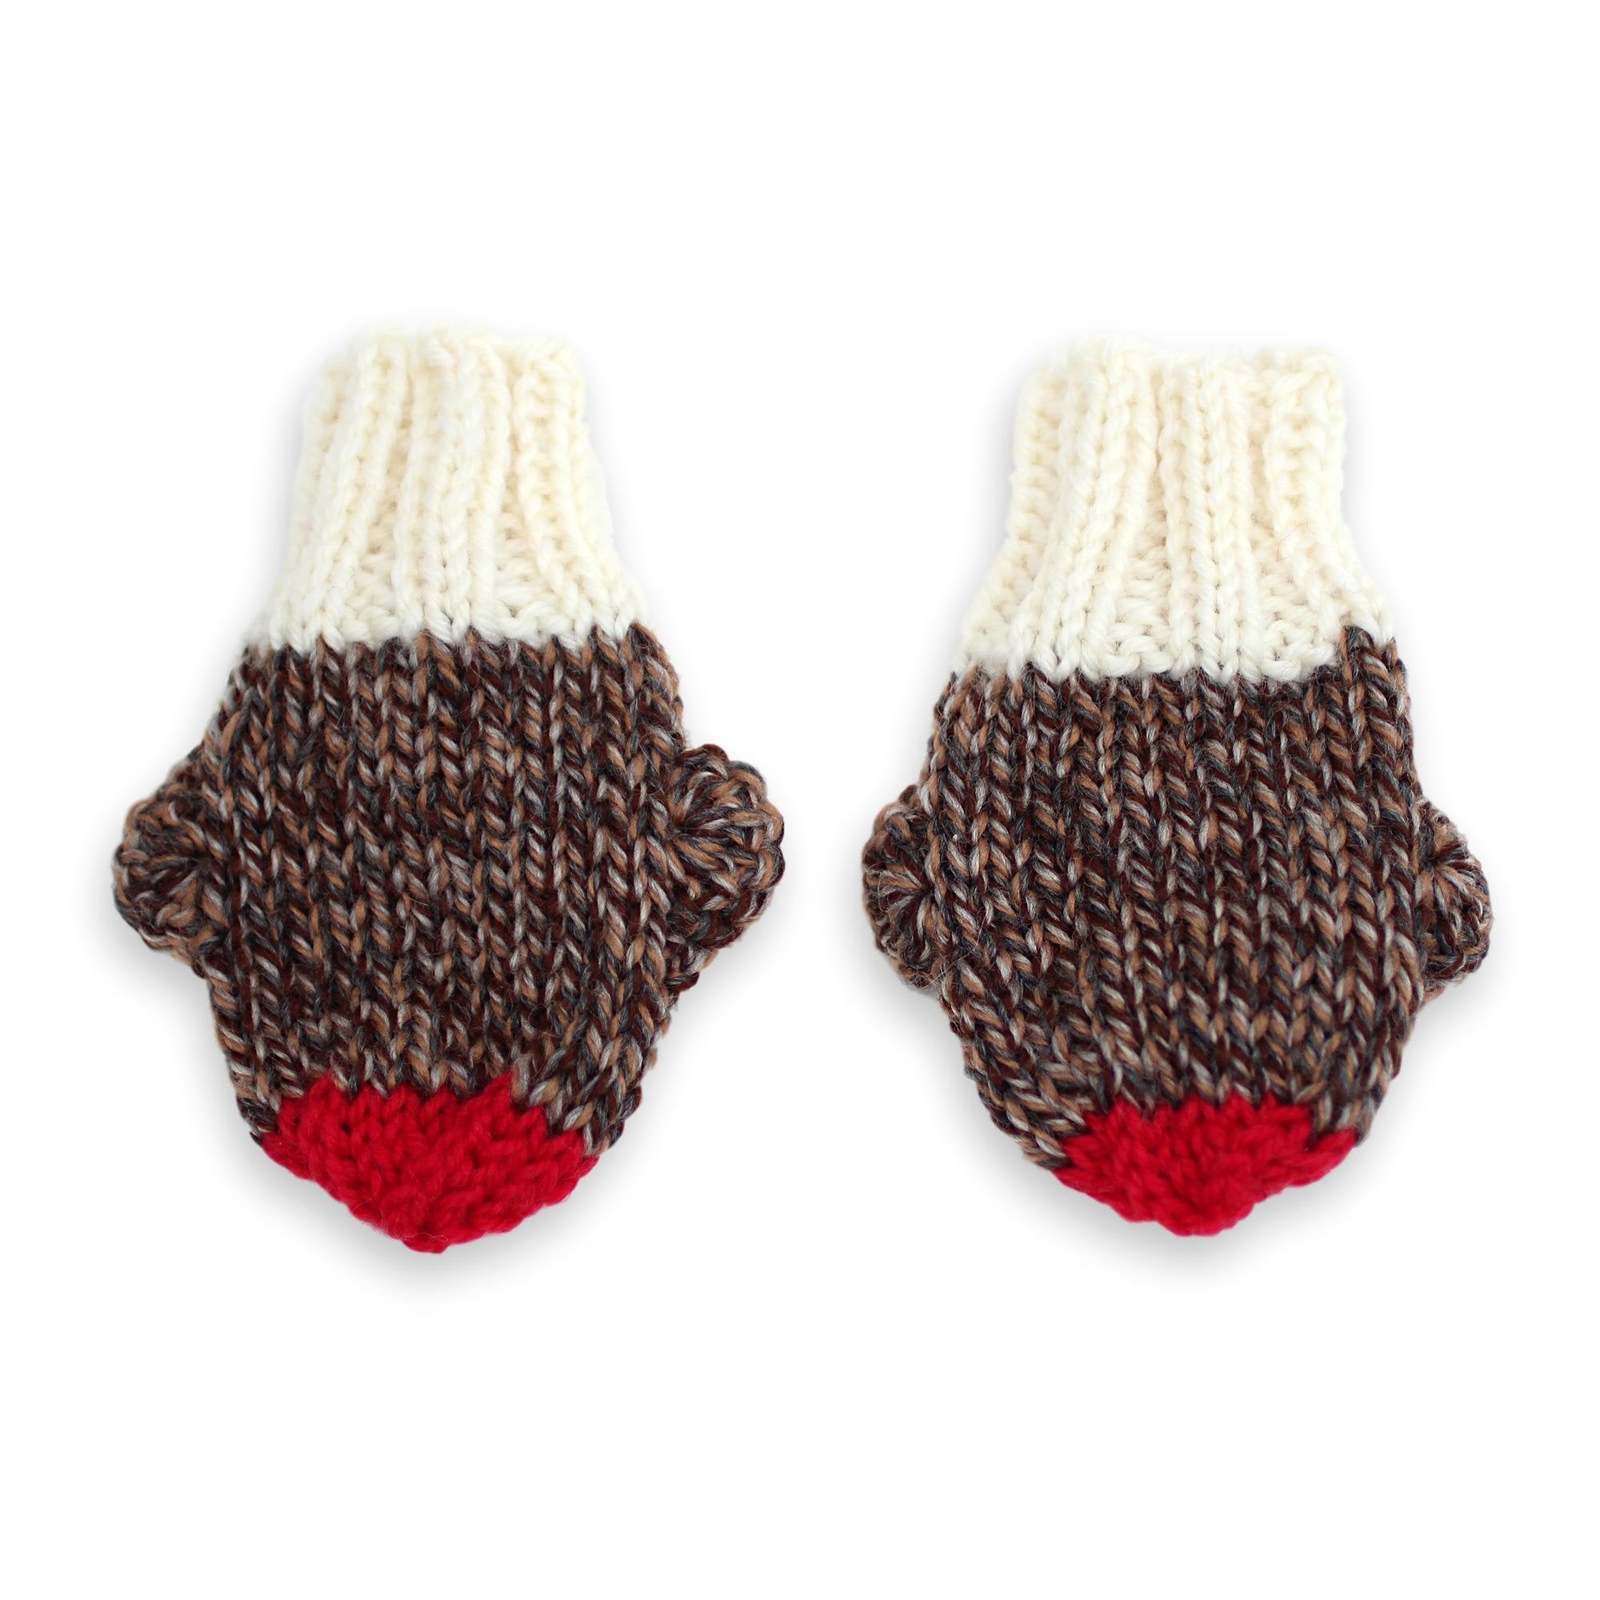 Animal Mittens No Thumb, Sock Monkey, 6 to 12 Months - Gloves & Mittens